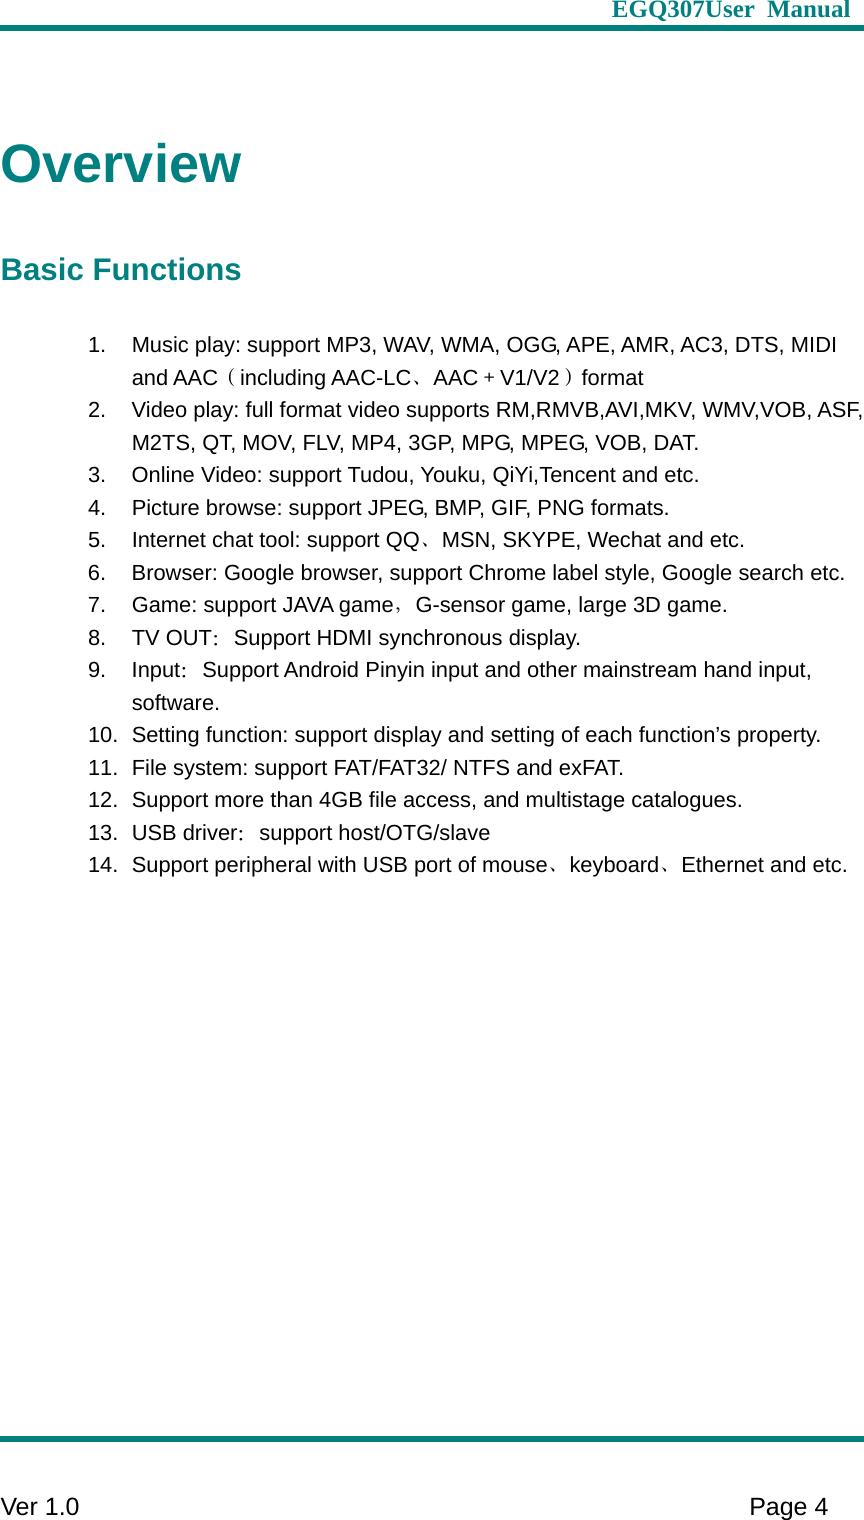                     EGQ307User Manual     Ver 1.0    Page 4   Overview Basic Functions 1.  Music play: support MP3, WAV, WMA, OGG, APE, AMR, AC3, DTS, MIDI and AAC（including AAC-LC、AAC＋V1/V2）format 2.  Video play: full format video supports RM,RMVB,AVI,MKV, WMV,VOB, ASF, M2TS, QT, MOV, FLV, MP4, 3GP, MPG, MPEG, VOB, DAT.   3.  Online Video: support Tudou, Youku, QiYi,Tencent and etc.   4.  Picture browse: support JPEG, BMP, GIF, PNG formats. 5.  Internet chat tool: support QQ、MSN, SKYPE, Wechat and etc.   6.  Browser: Google browser, support Chrome label style, Google search etc. 7.  Game: support JAVA game，G-sensor game, large 3D game. 8. TV OUT：Support HDMI synchronous display. 9. Input：Support Android Pinyin input and other mainstream hand input, software.  10.  Setting function: support display and setting of each function’s property.   11.  File system: support FAT/FAT32/ NTFS and exFAT. 12.  Support more than 4GB file access, and multistage catalogues.   13. USB driver：support host/OTG/slave 14.  Support peripheral with USB port of mouse、keyboard、Ethernet and etc. 